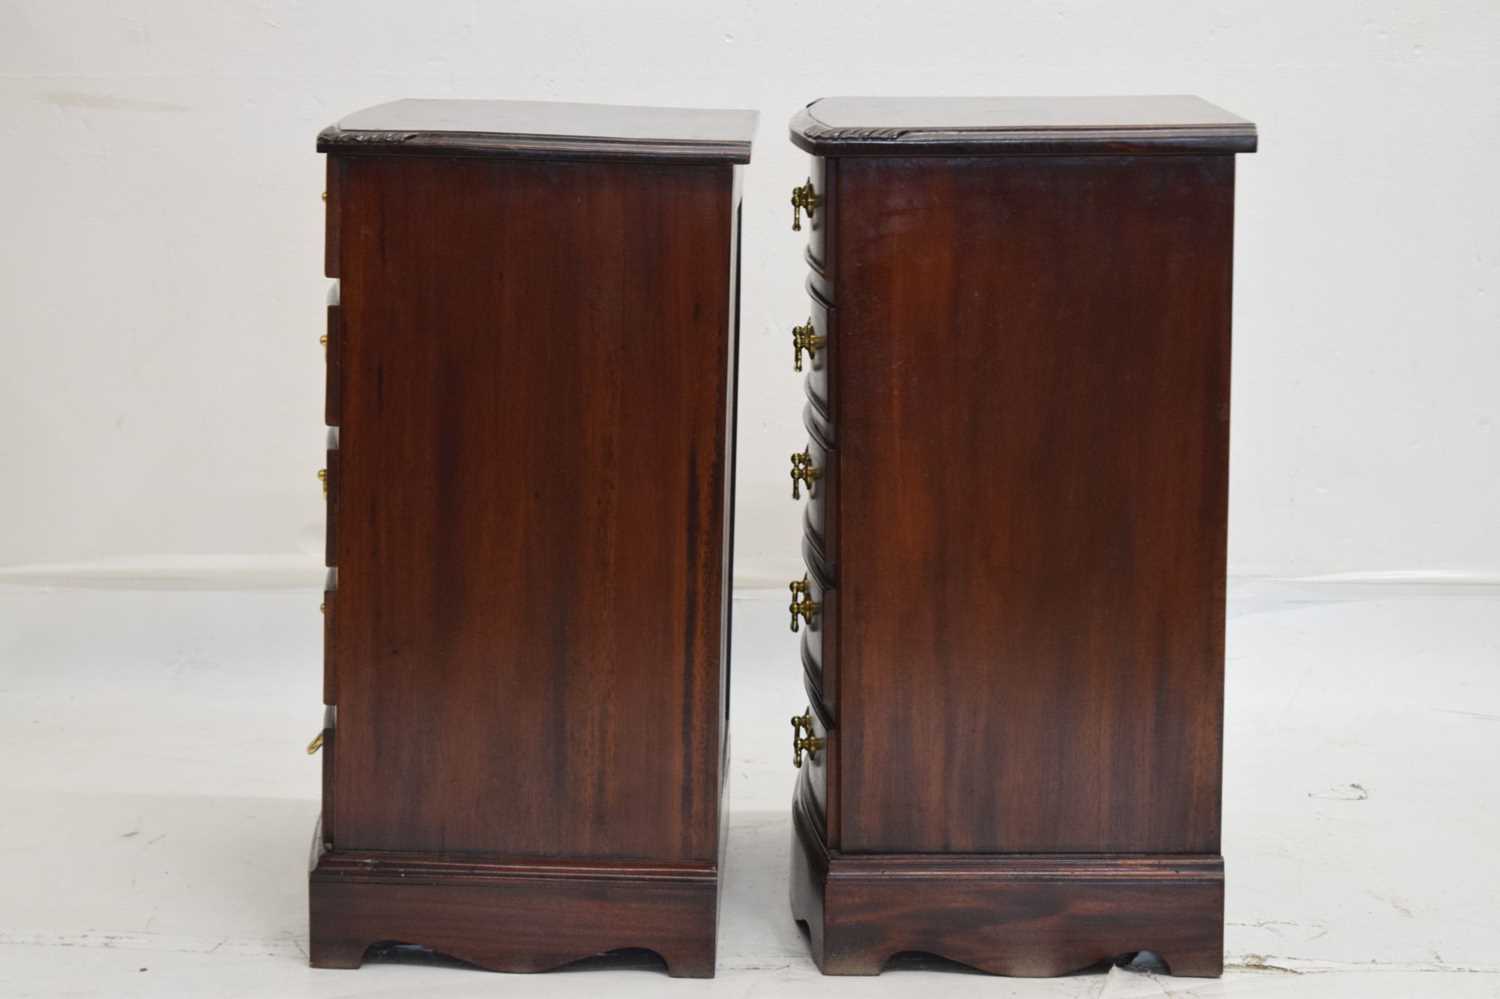 Pair of reproduction mahogany five-drawer bedside chests of drawers - Image 8 of 8